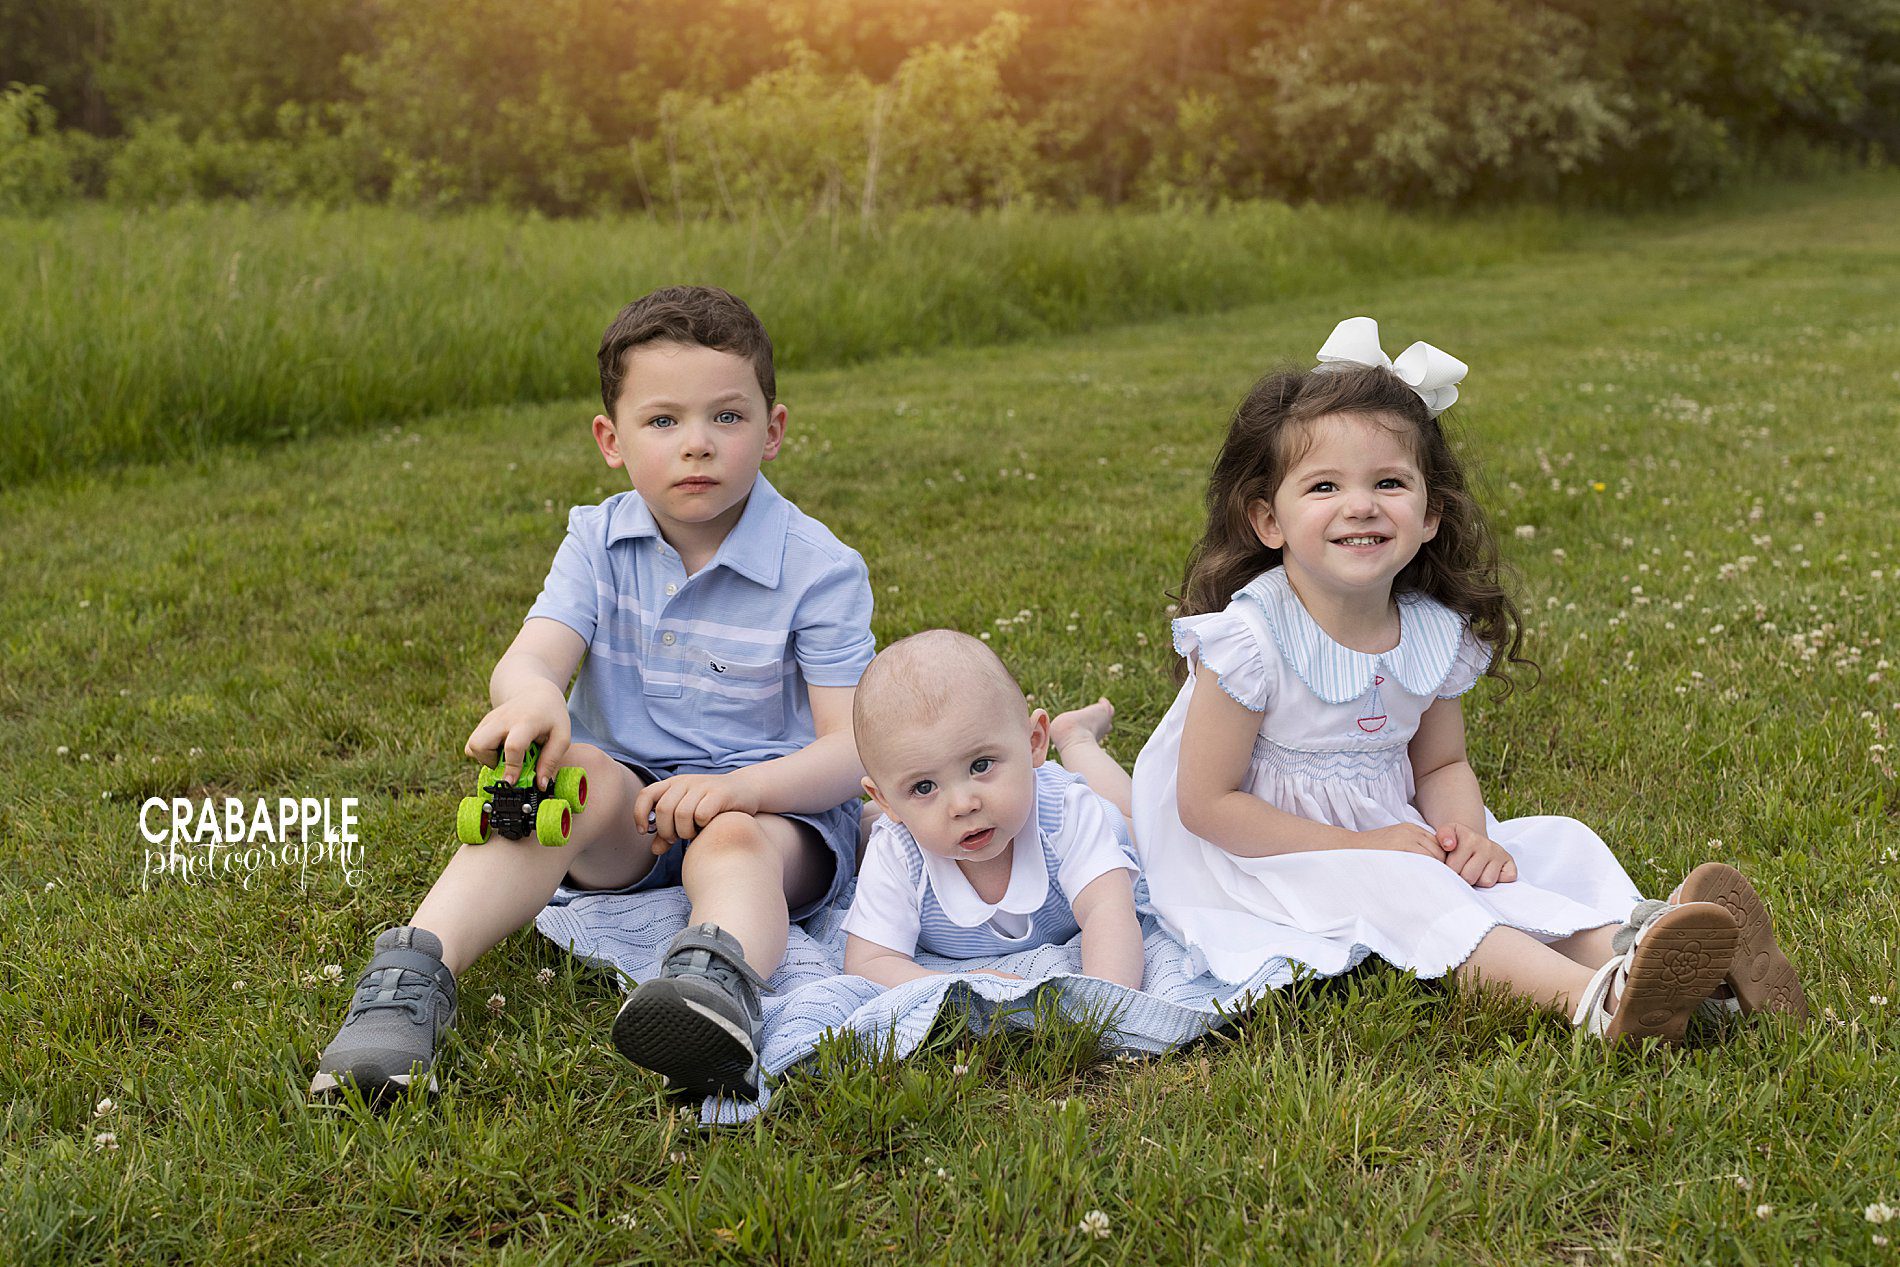 sibling photo ideas outdoors